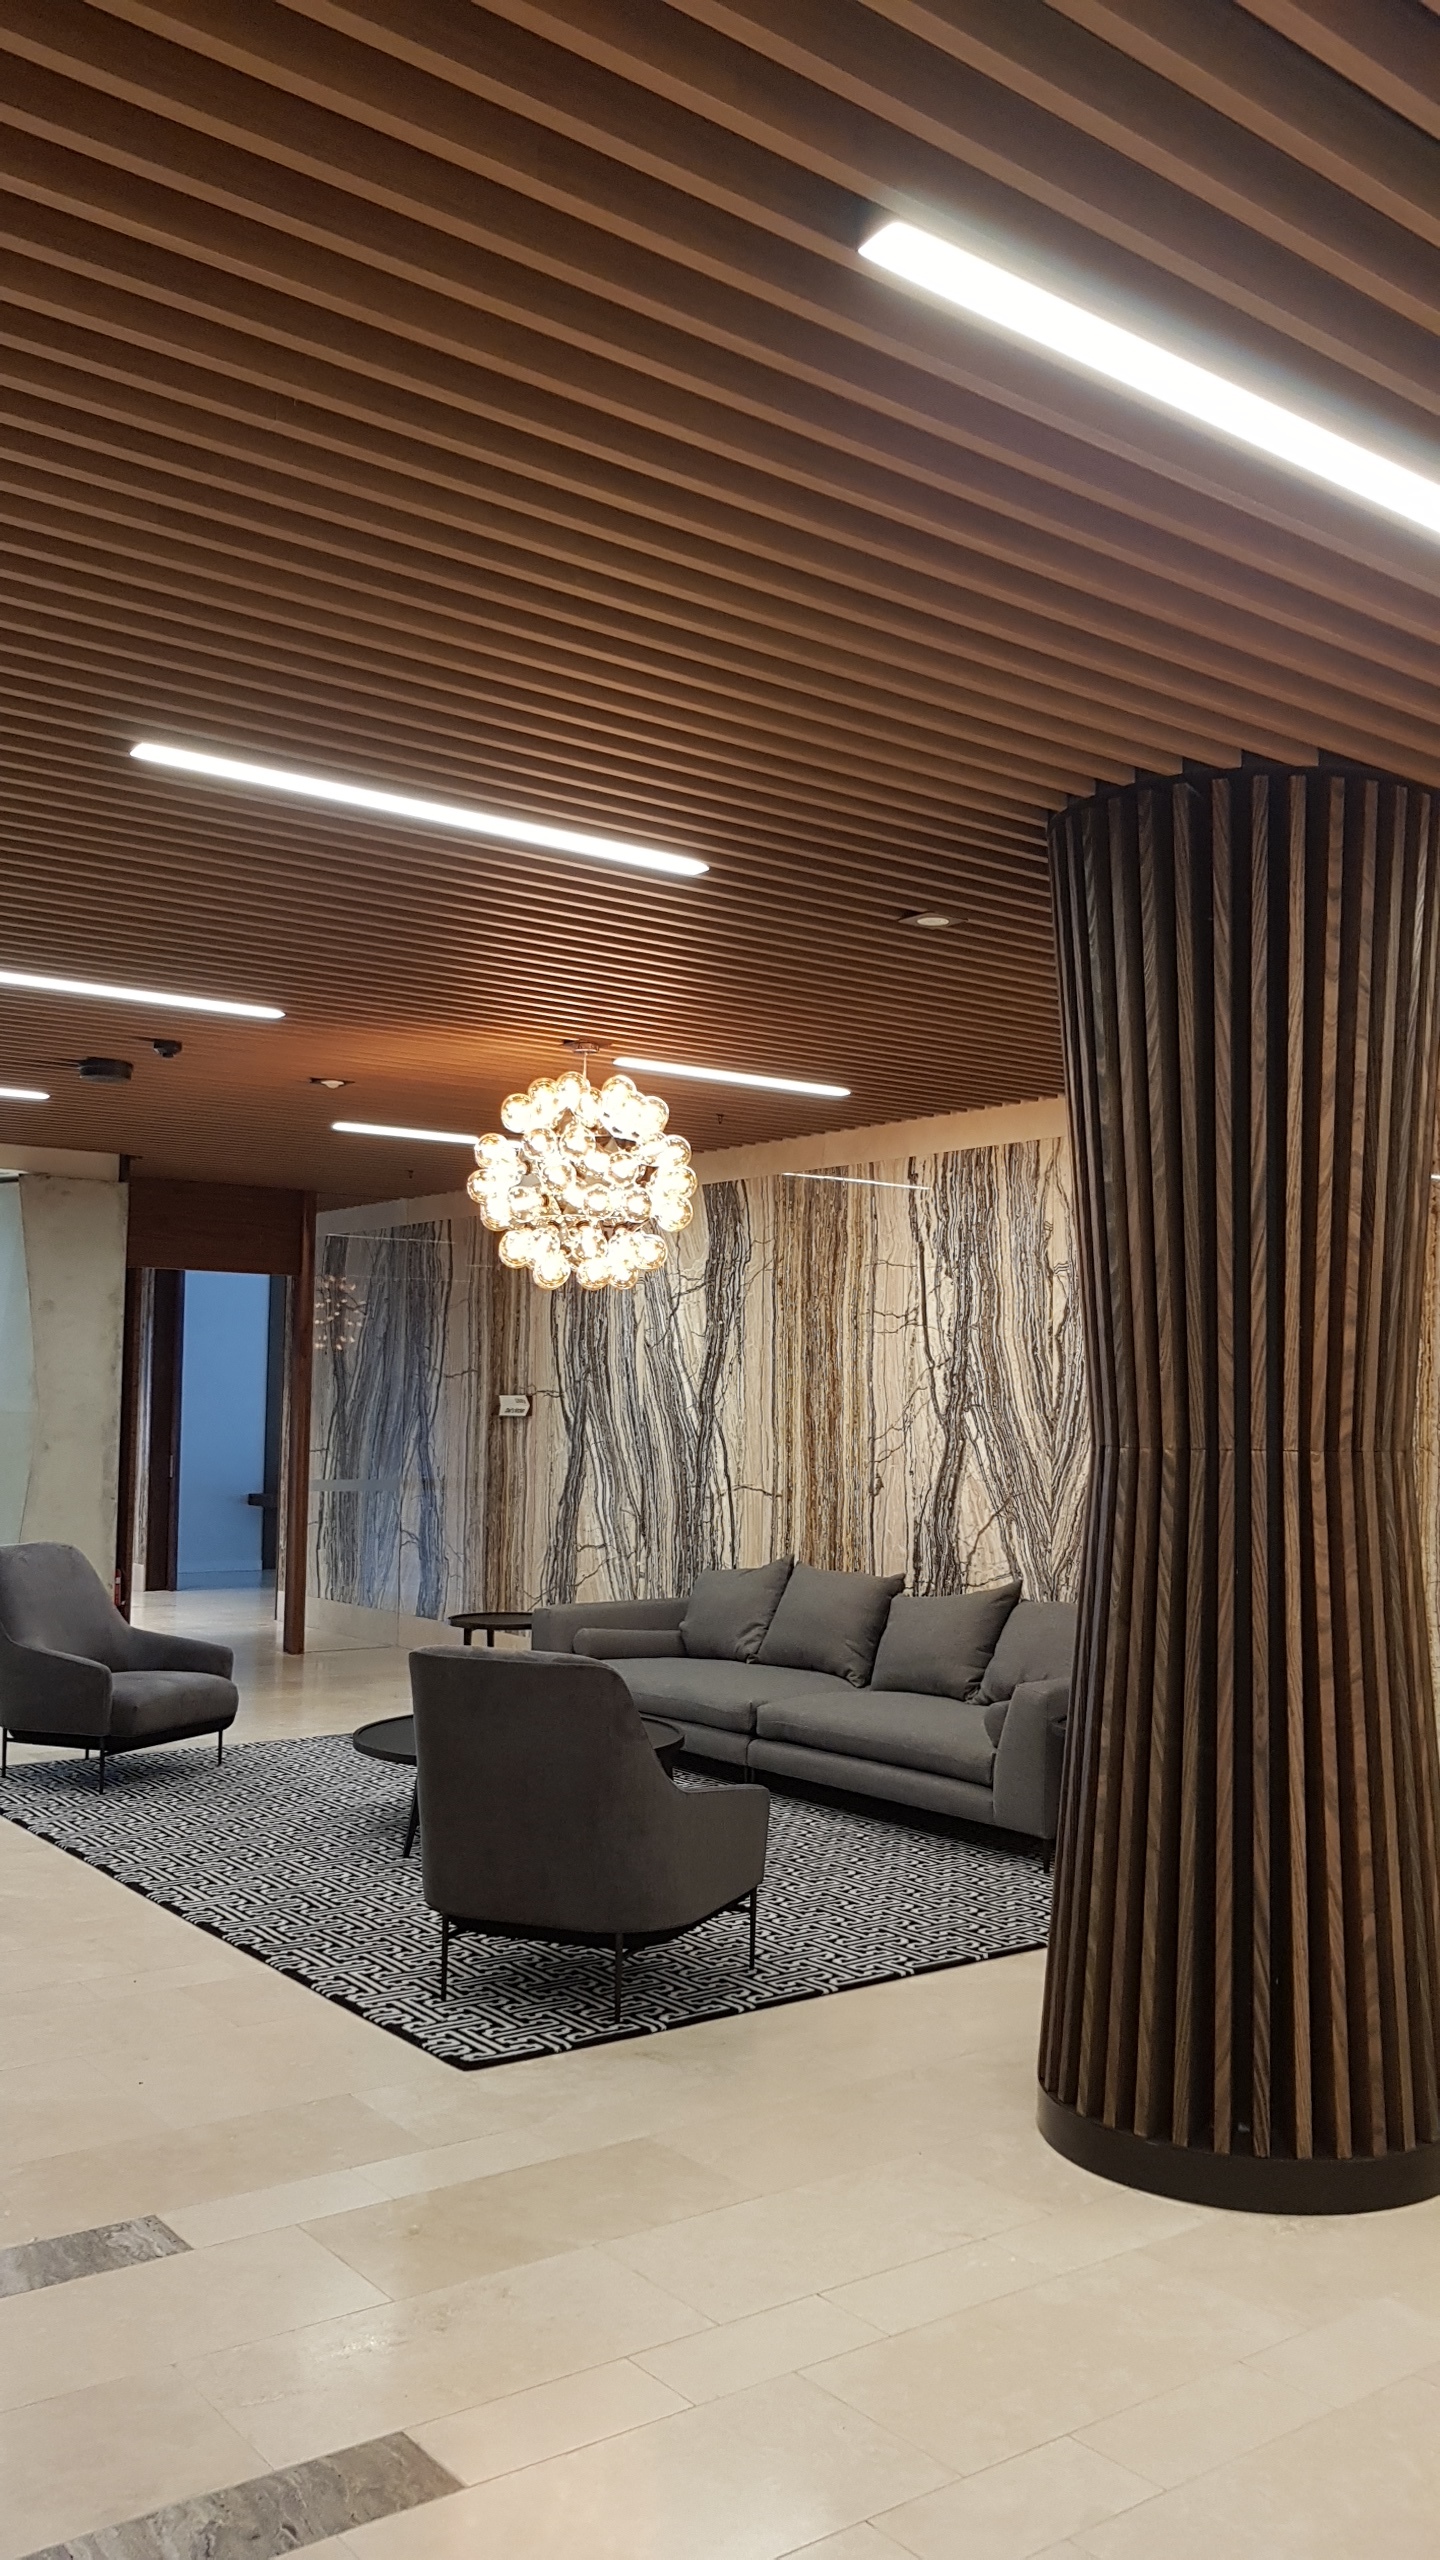  Lakeside Apartments Lobby - Melbourne VIC Ever Art Wood® Kabebari-T Suspended Ceiling System - Kabebari 30x85 battens in Kuri Masame; Custom powdercoated T section in Black 